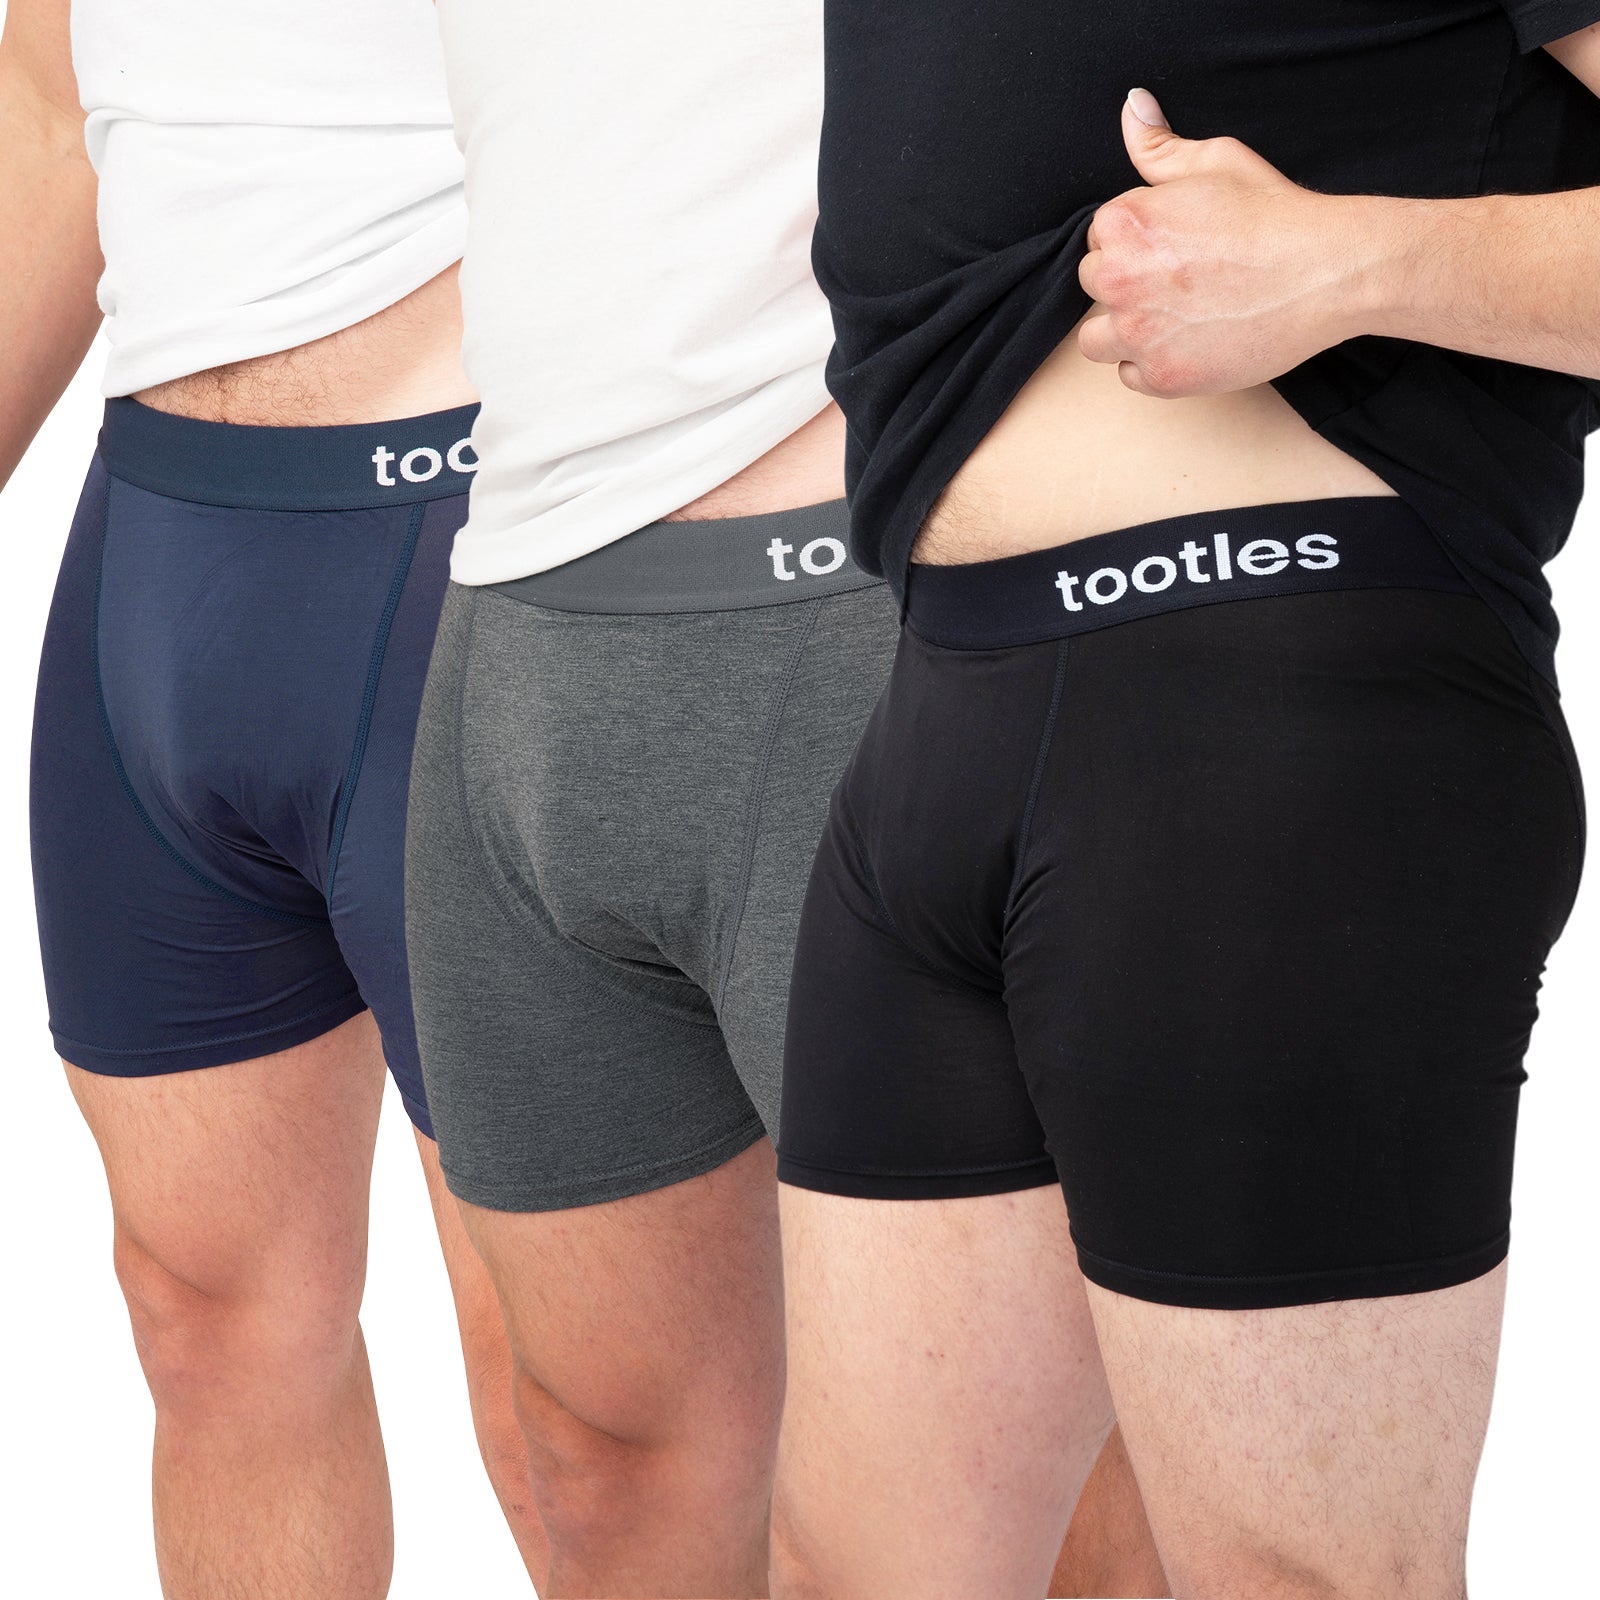 Fart Filtering Underwear - Yes This Is A Real Thing